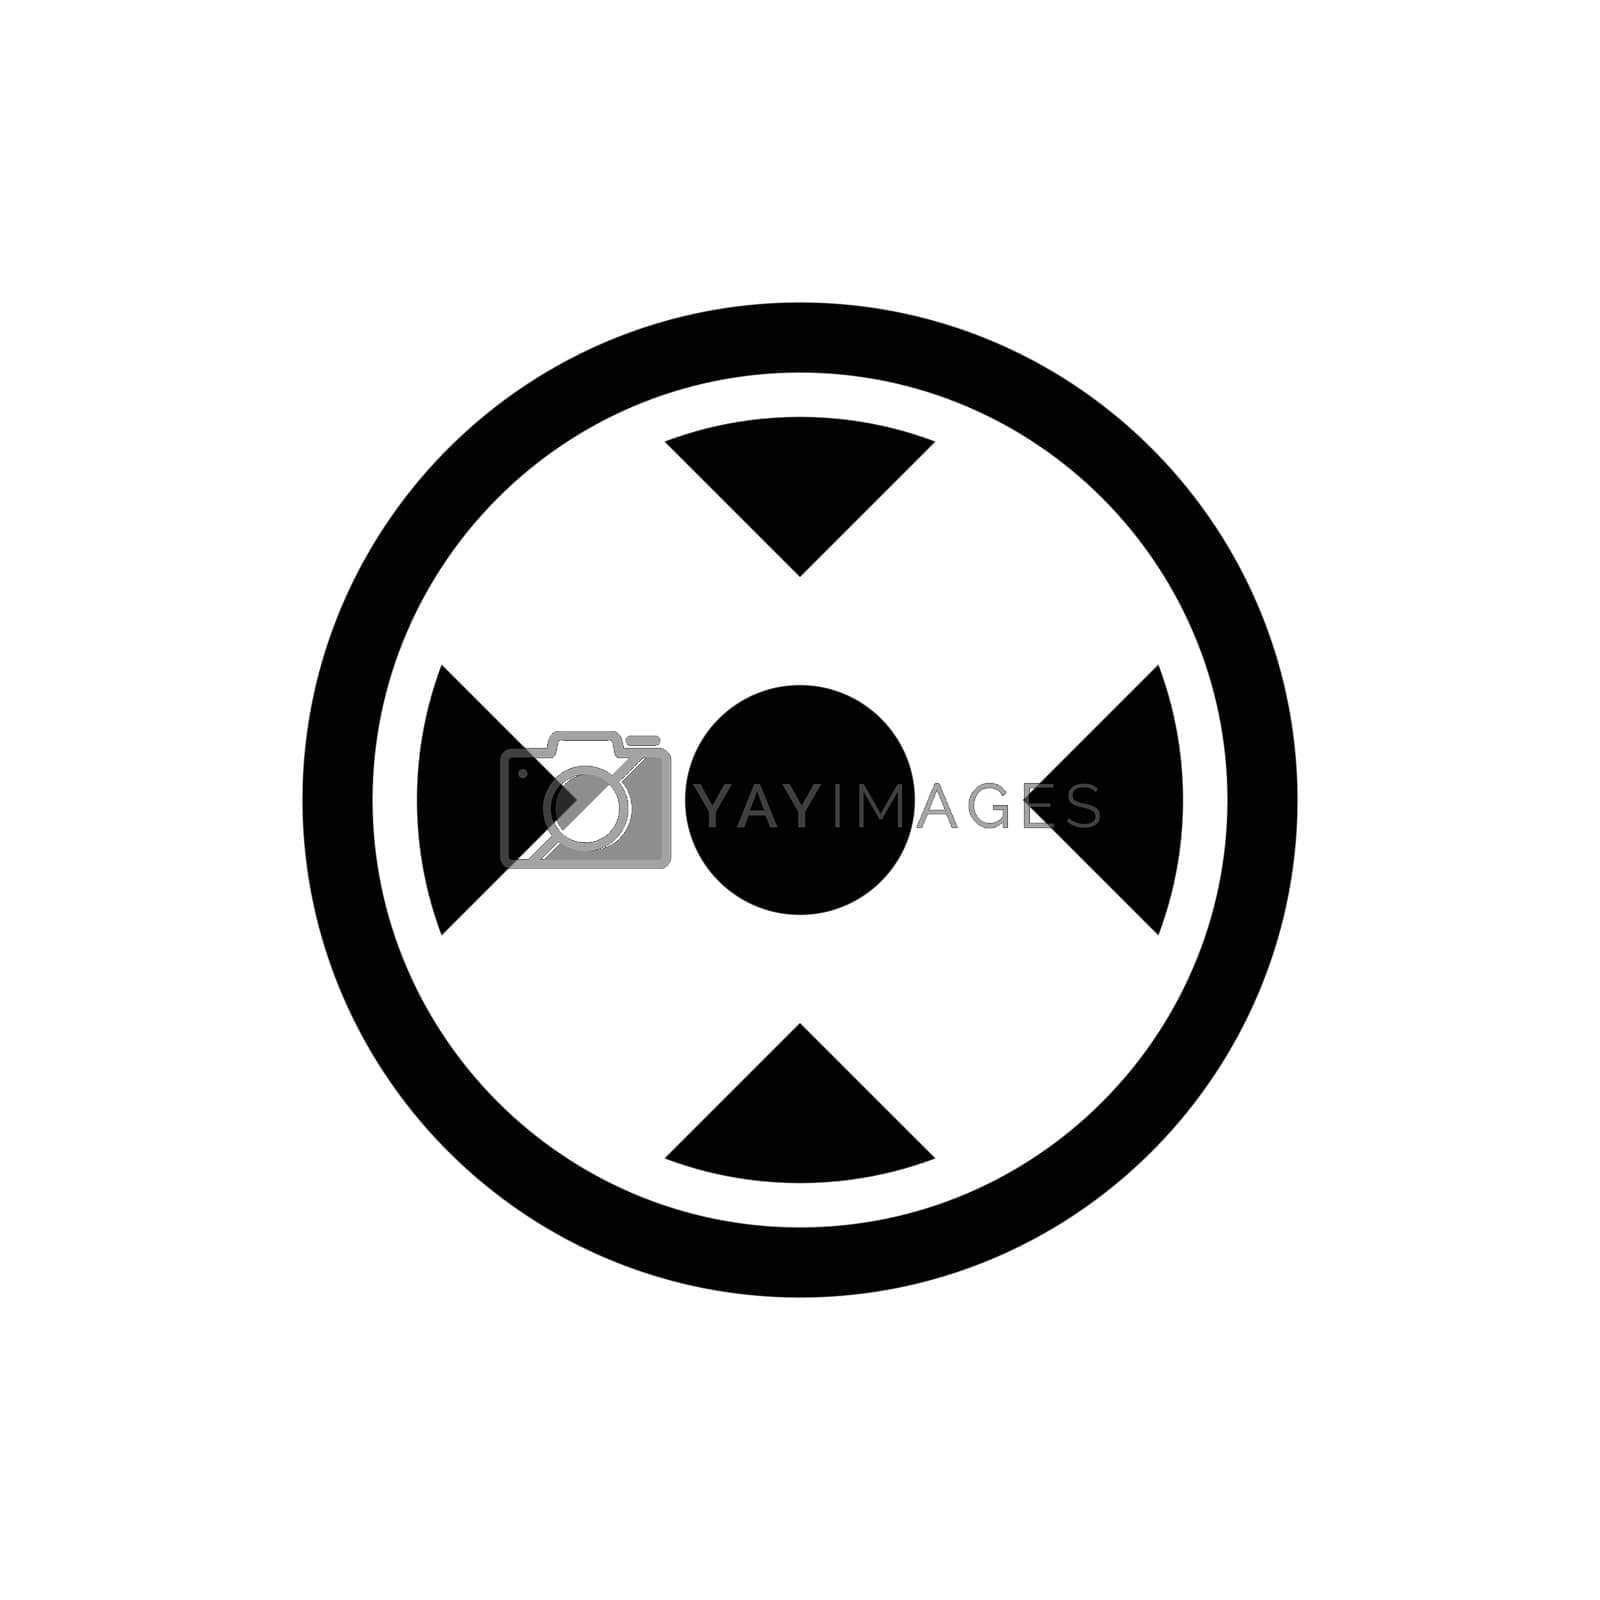 Royalty free image of Camera focus icon by delwar018